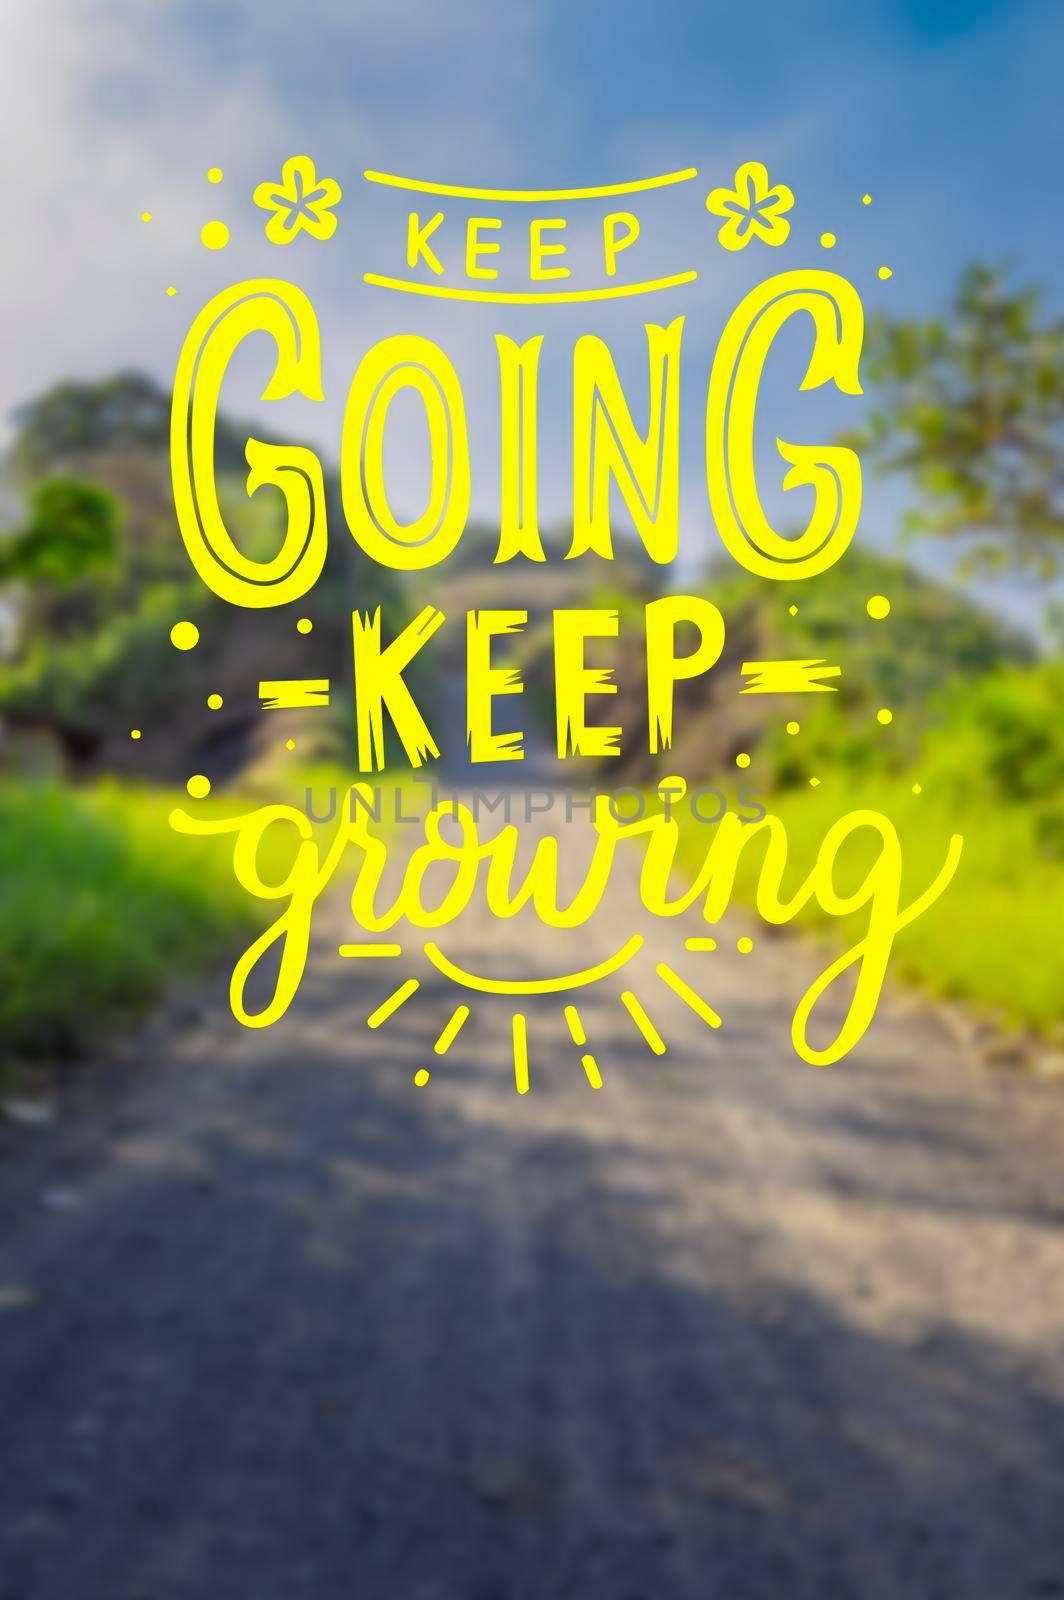 motivational phrases keep going keep growing, motivational messages keep going, keep growing by isaiphoto